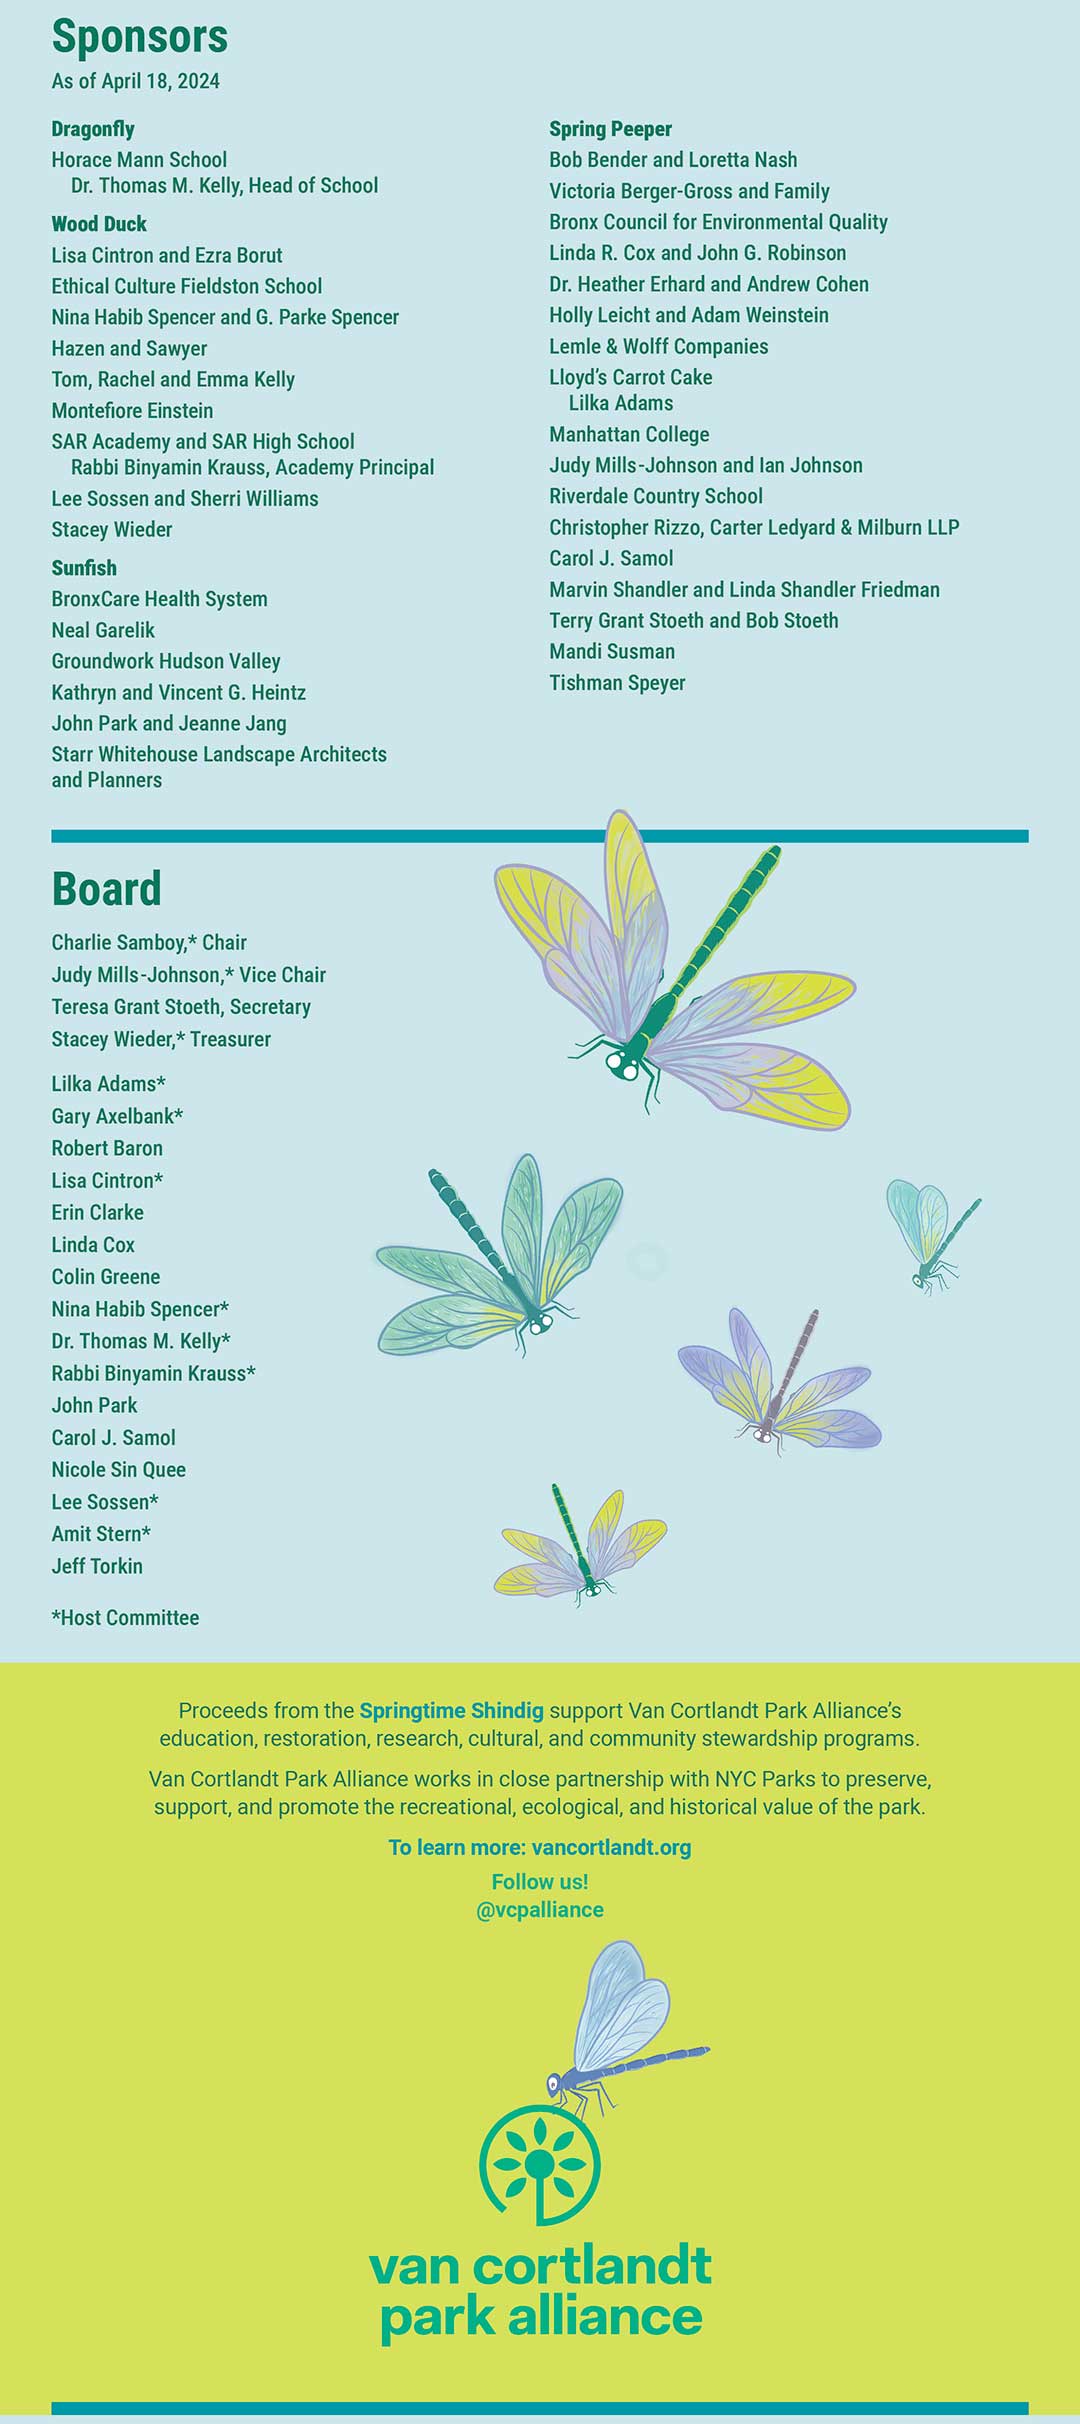 Blue background with green text listing sponsors and board members with dragonflies and then VCPA details over a yellow background